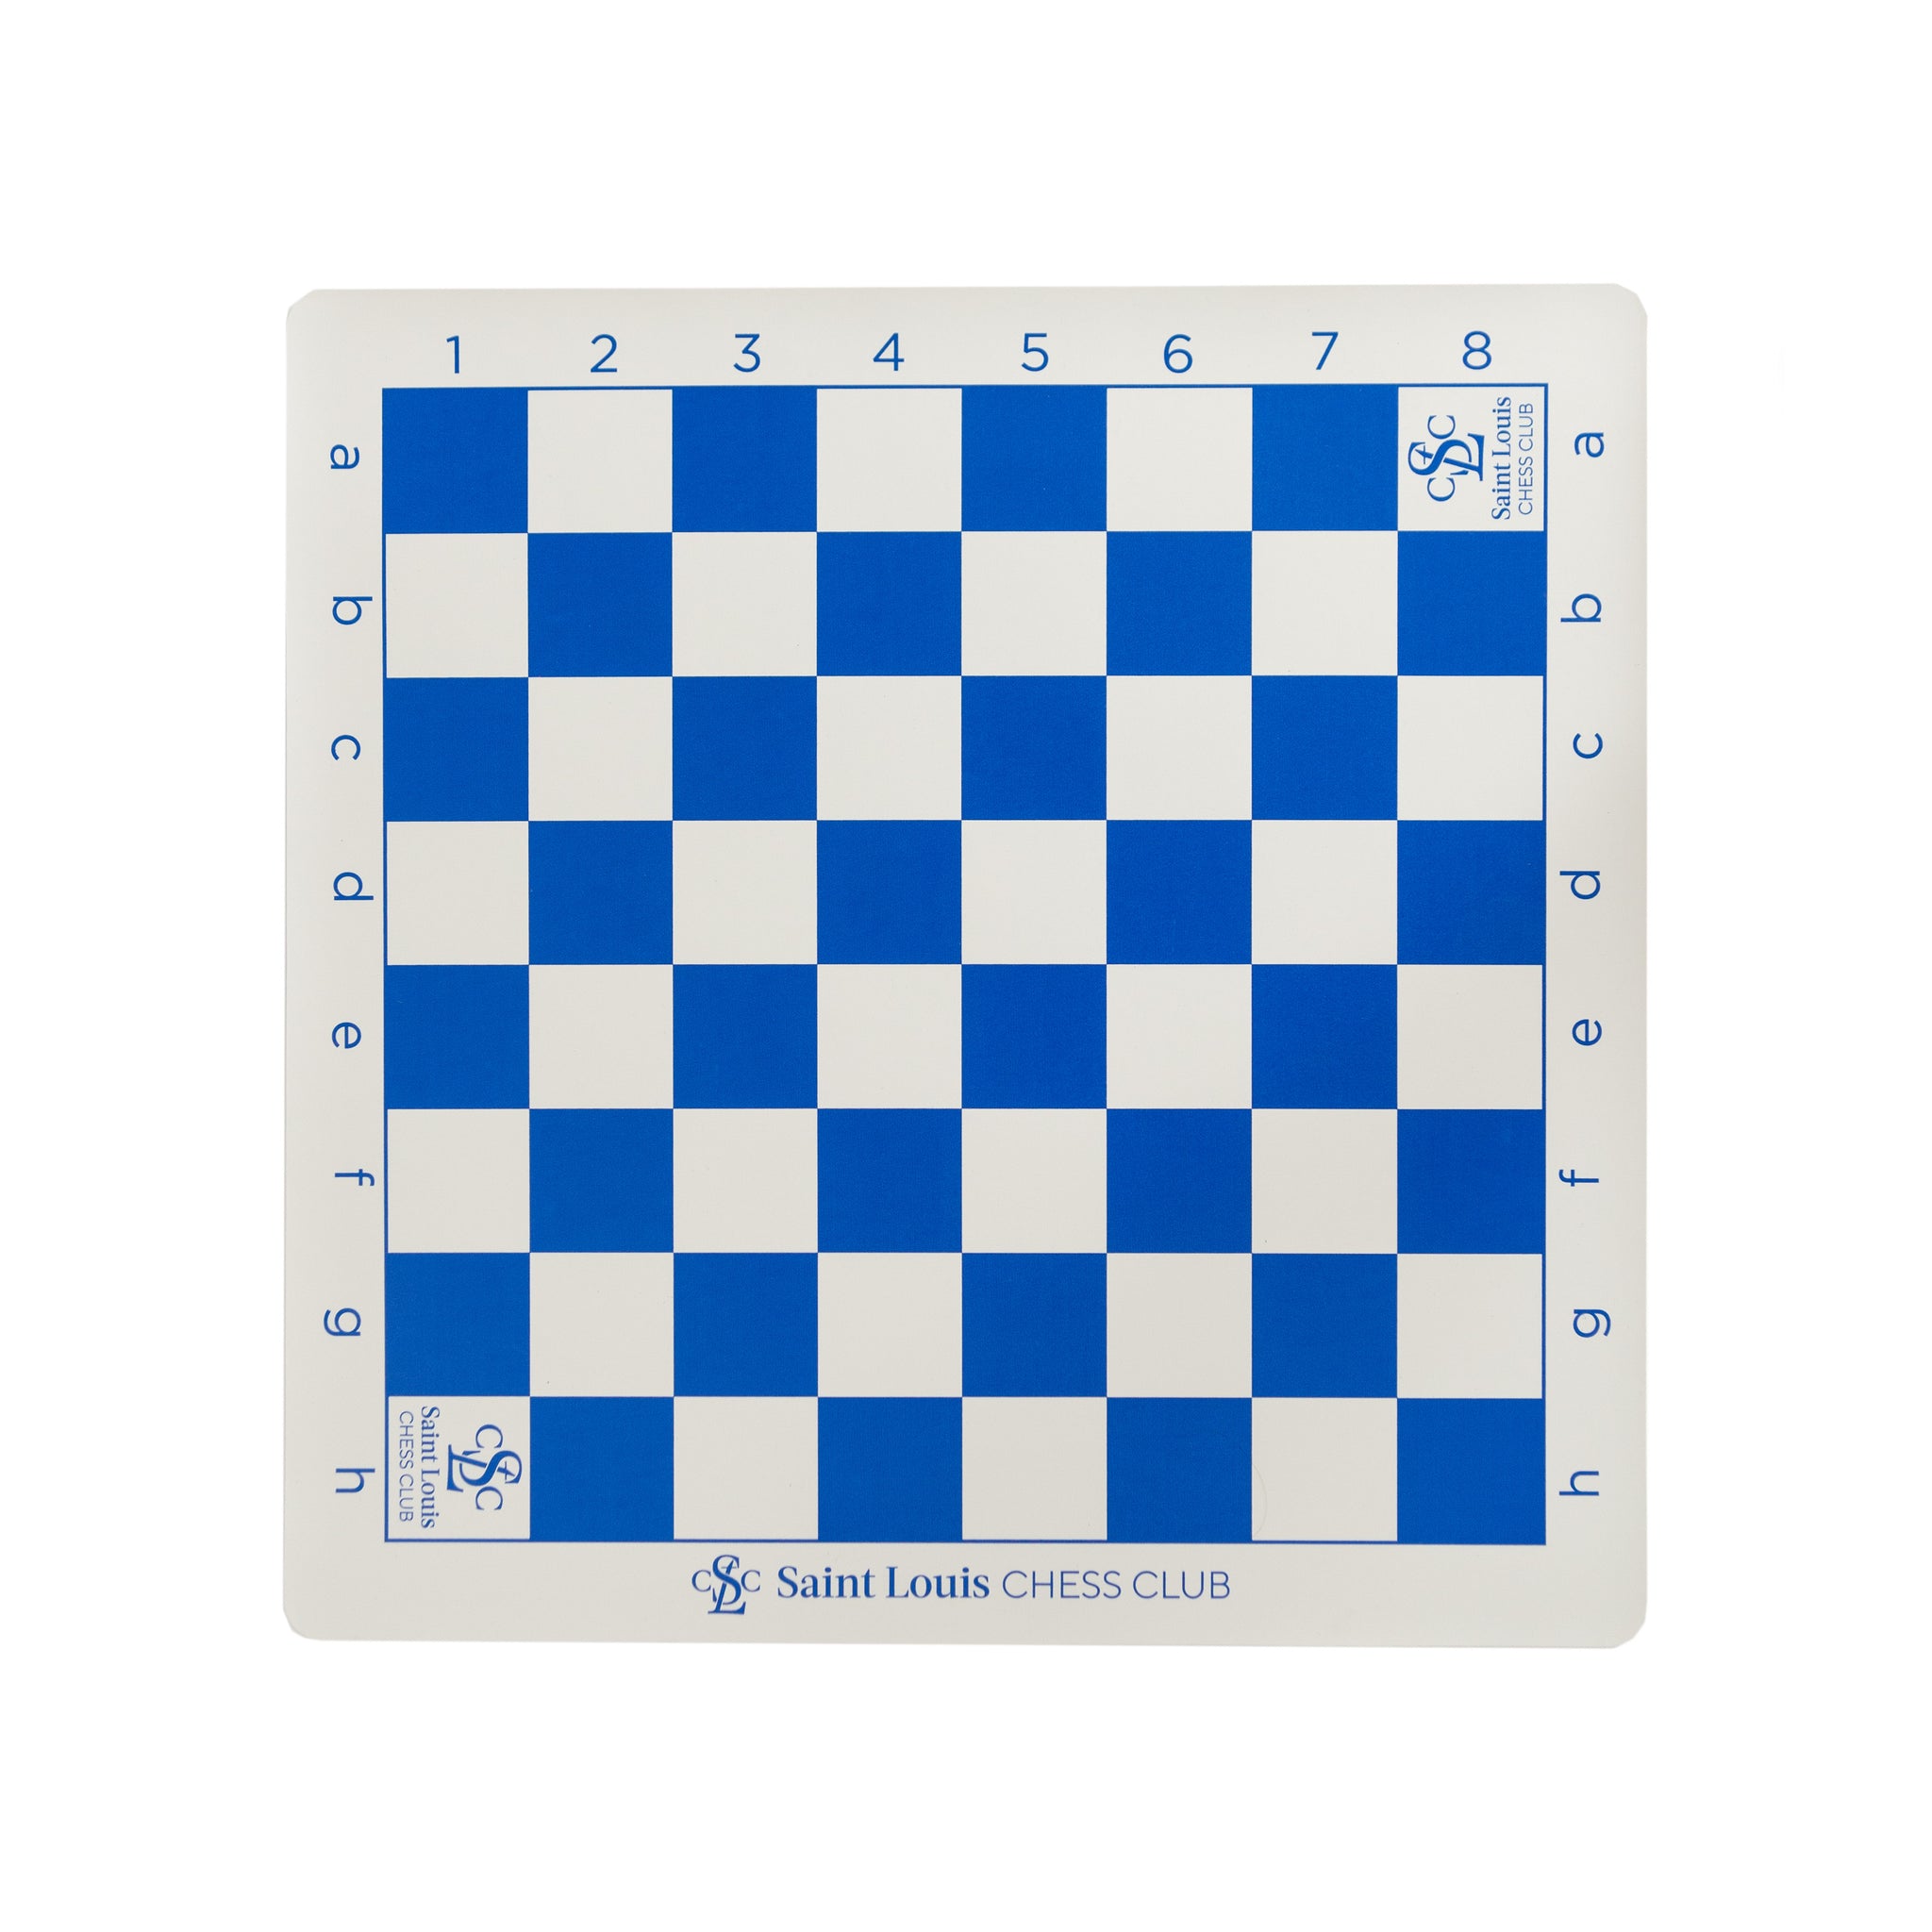 How to produce a chessboard pattern in PHP — LEARN TO CODE